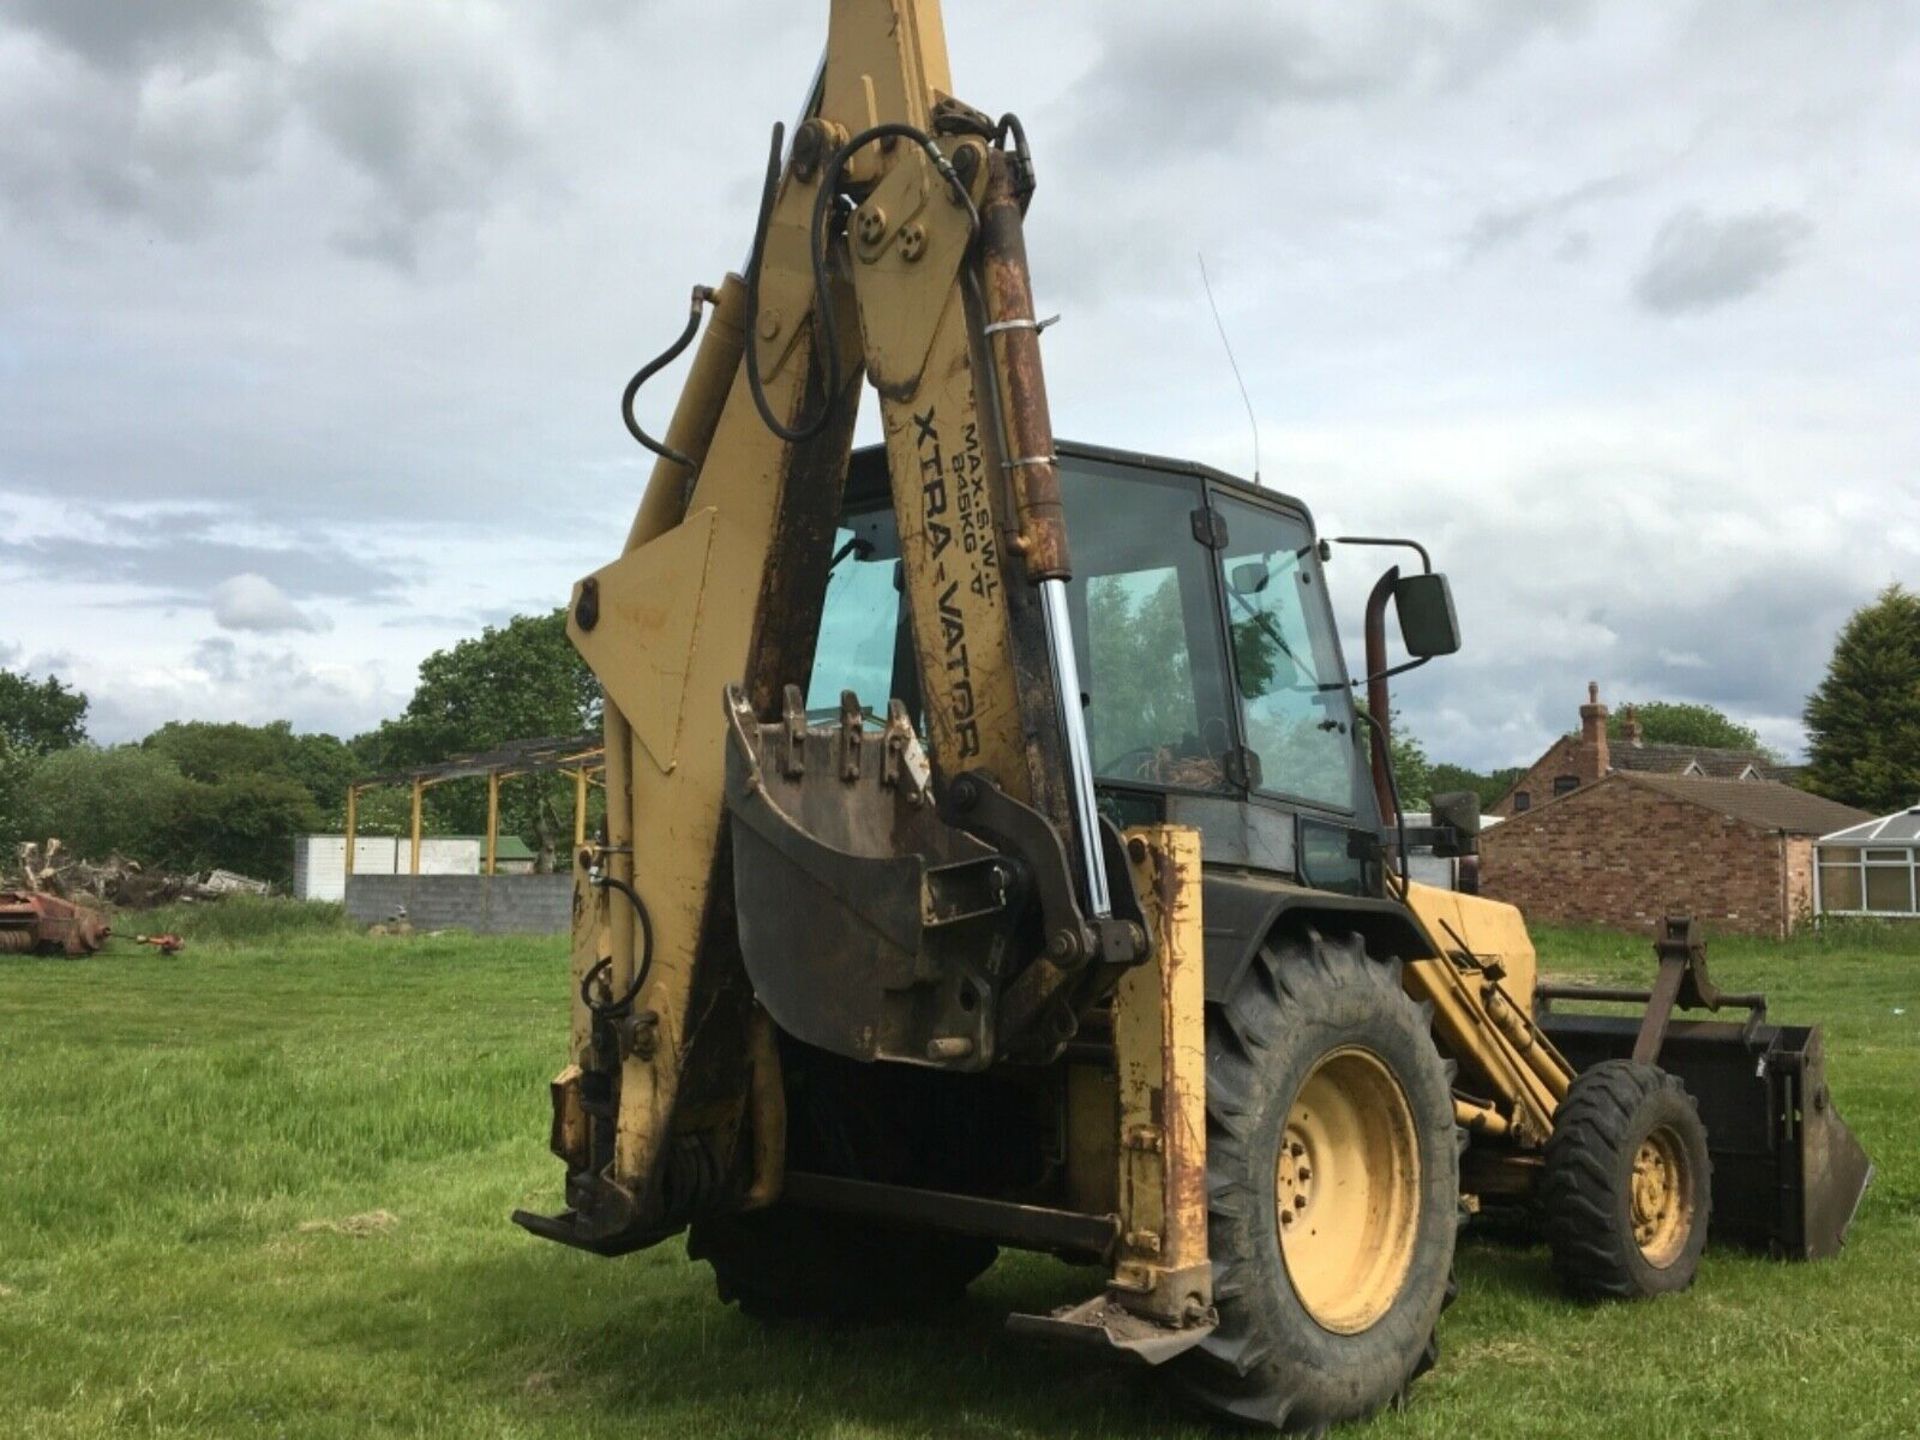 FORD NEW HOLLAND 655C 4X4 WHEEL DRIVE BACKHOE DIGGER, C/W FULL SET OF REAR BUCKETS *NO VAT* - Image 2 of 6